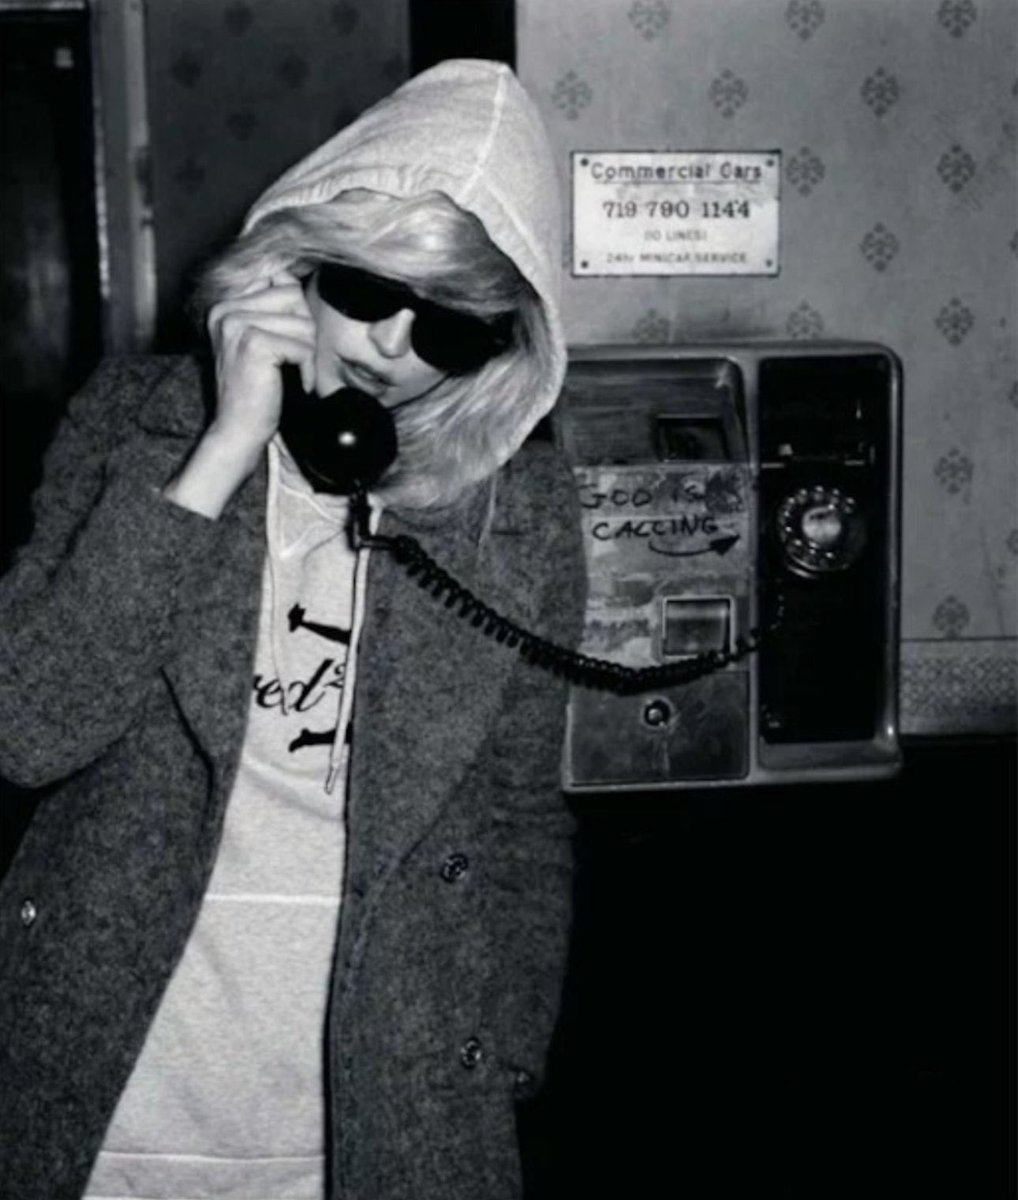 Happy Monday to my Twitter family 🖤 Debbie's hanging on the telephone, and sorry she can't be with us + wants us all to have a great week! 🖤 #DebbieHarry #Blondie @NewWaveAndPunk @phatalstu @picturethis74 @___Hayley_8___ @Philak282 @FatOldAnarchist @andreag67 📸unknown